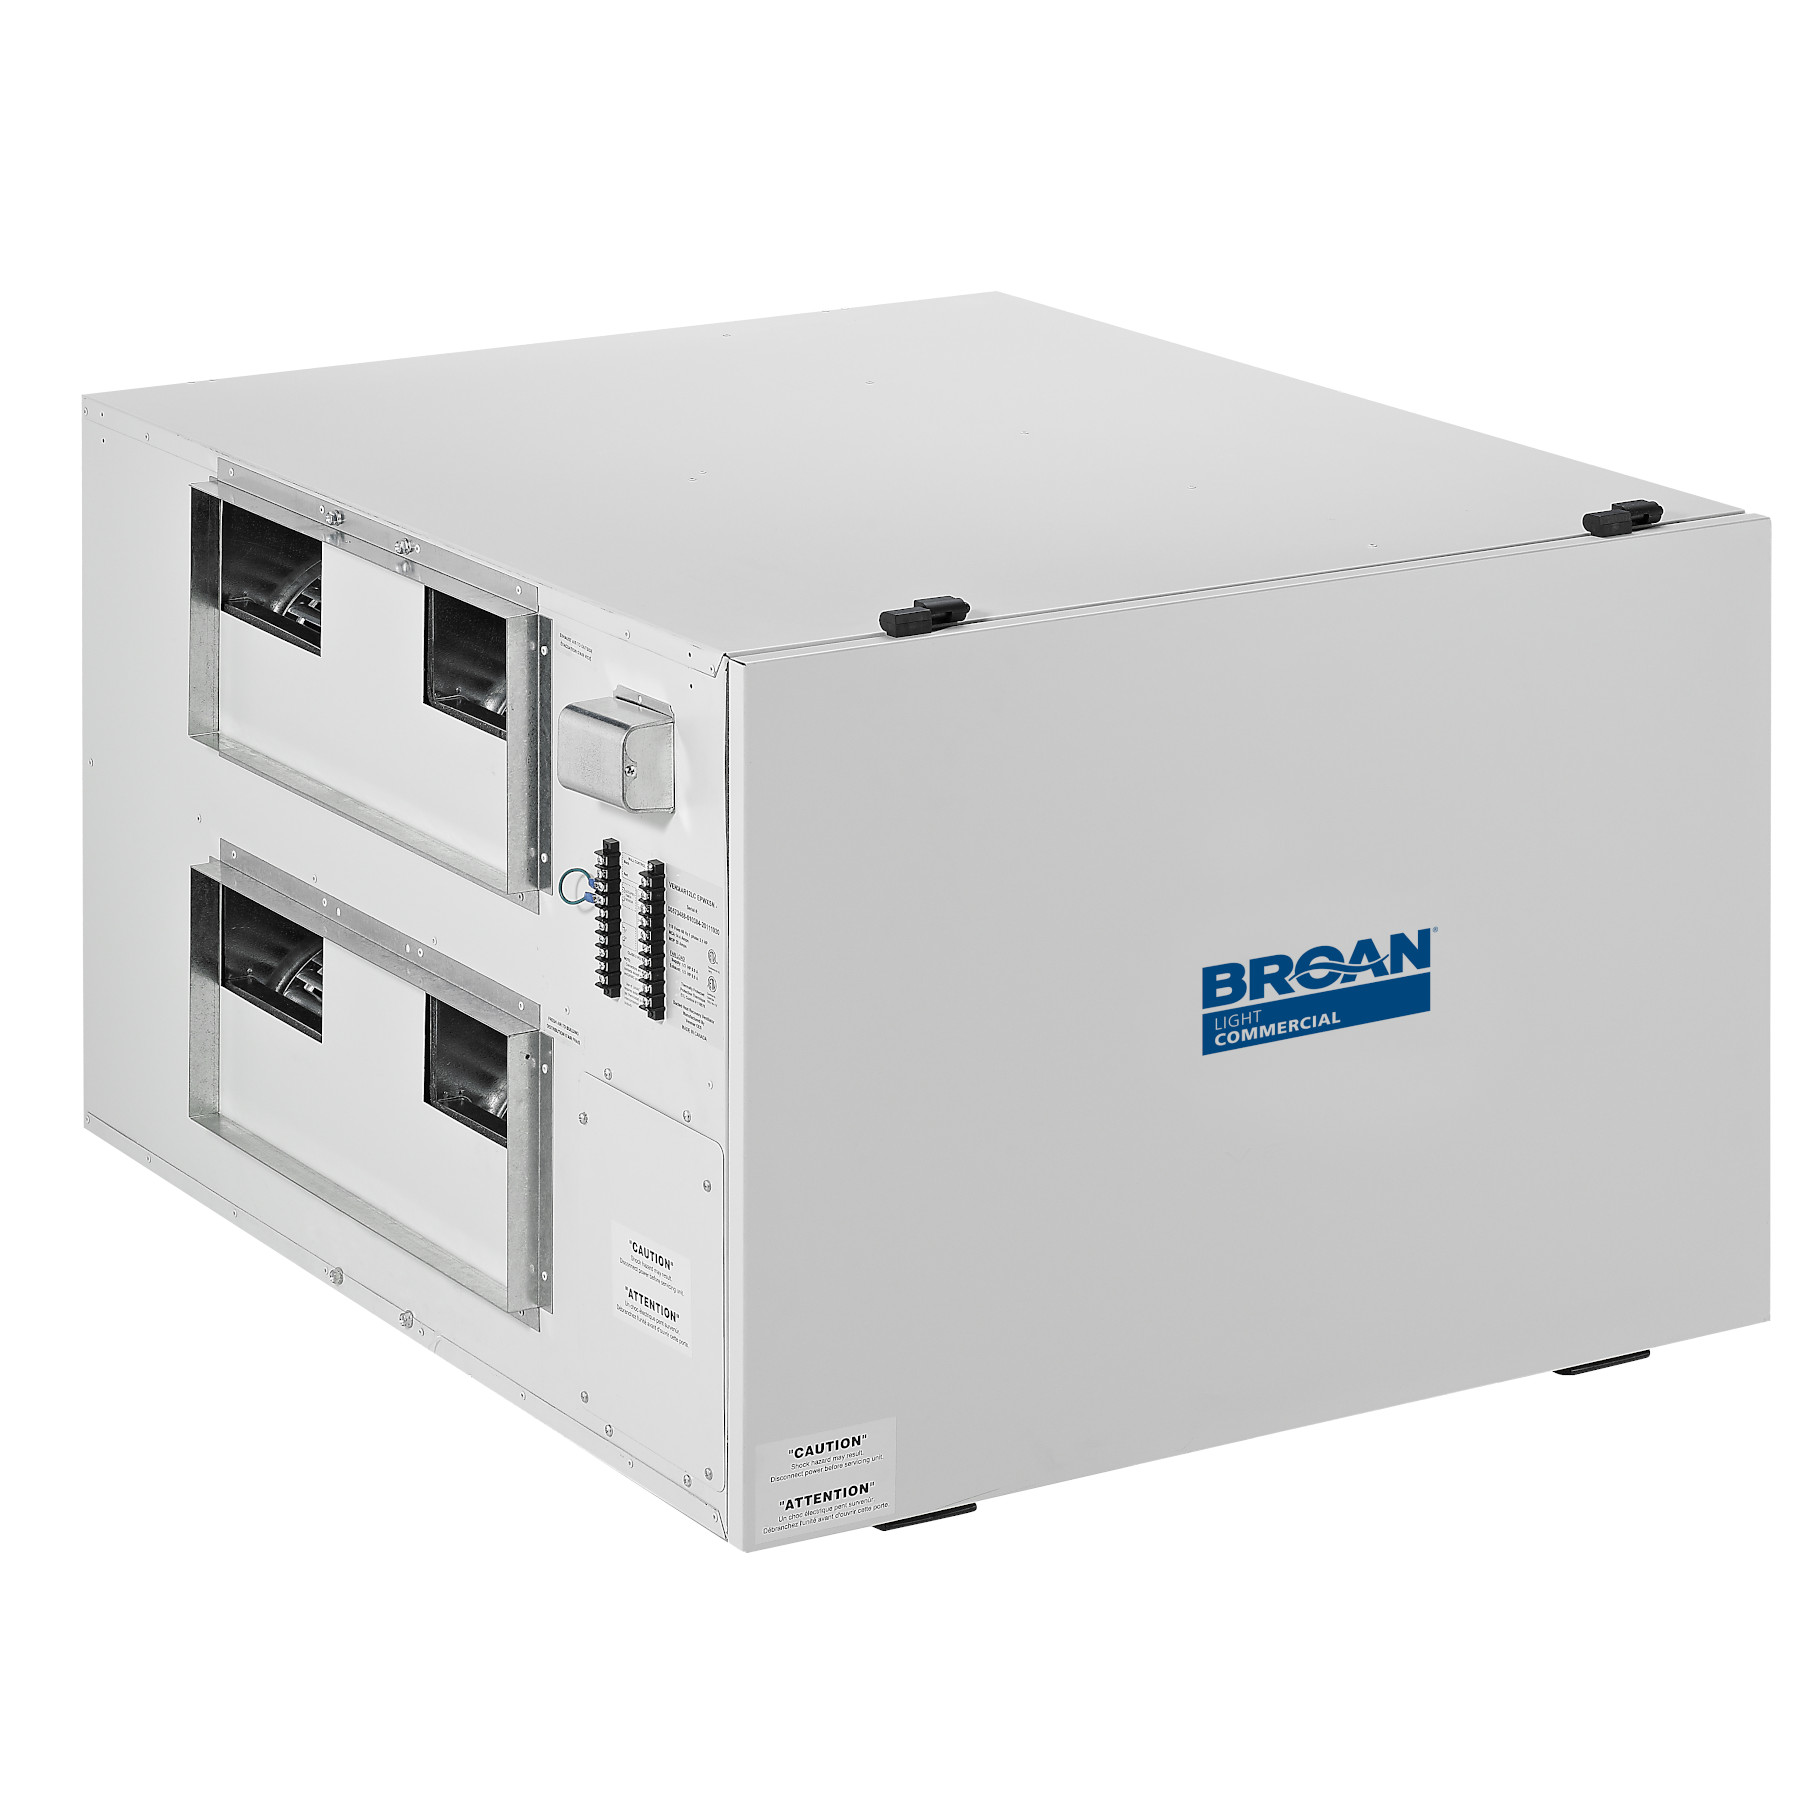 **DISCONTINUED** Broan® High Efficiency Heat Recovery Ventilator for Small Businesses, 1026 CFM at 0.4 in. w.g.